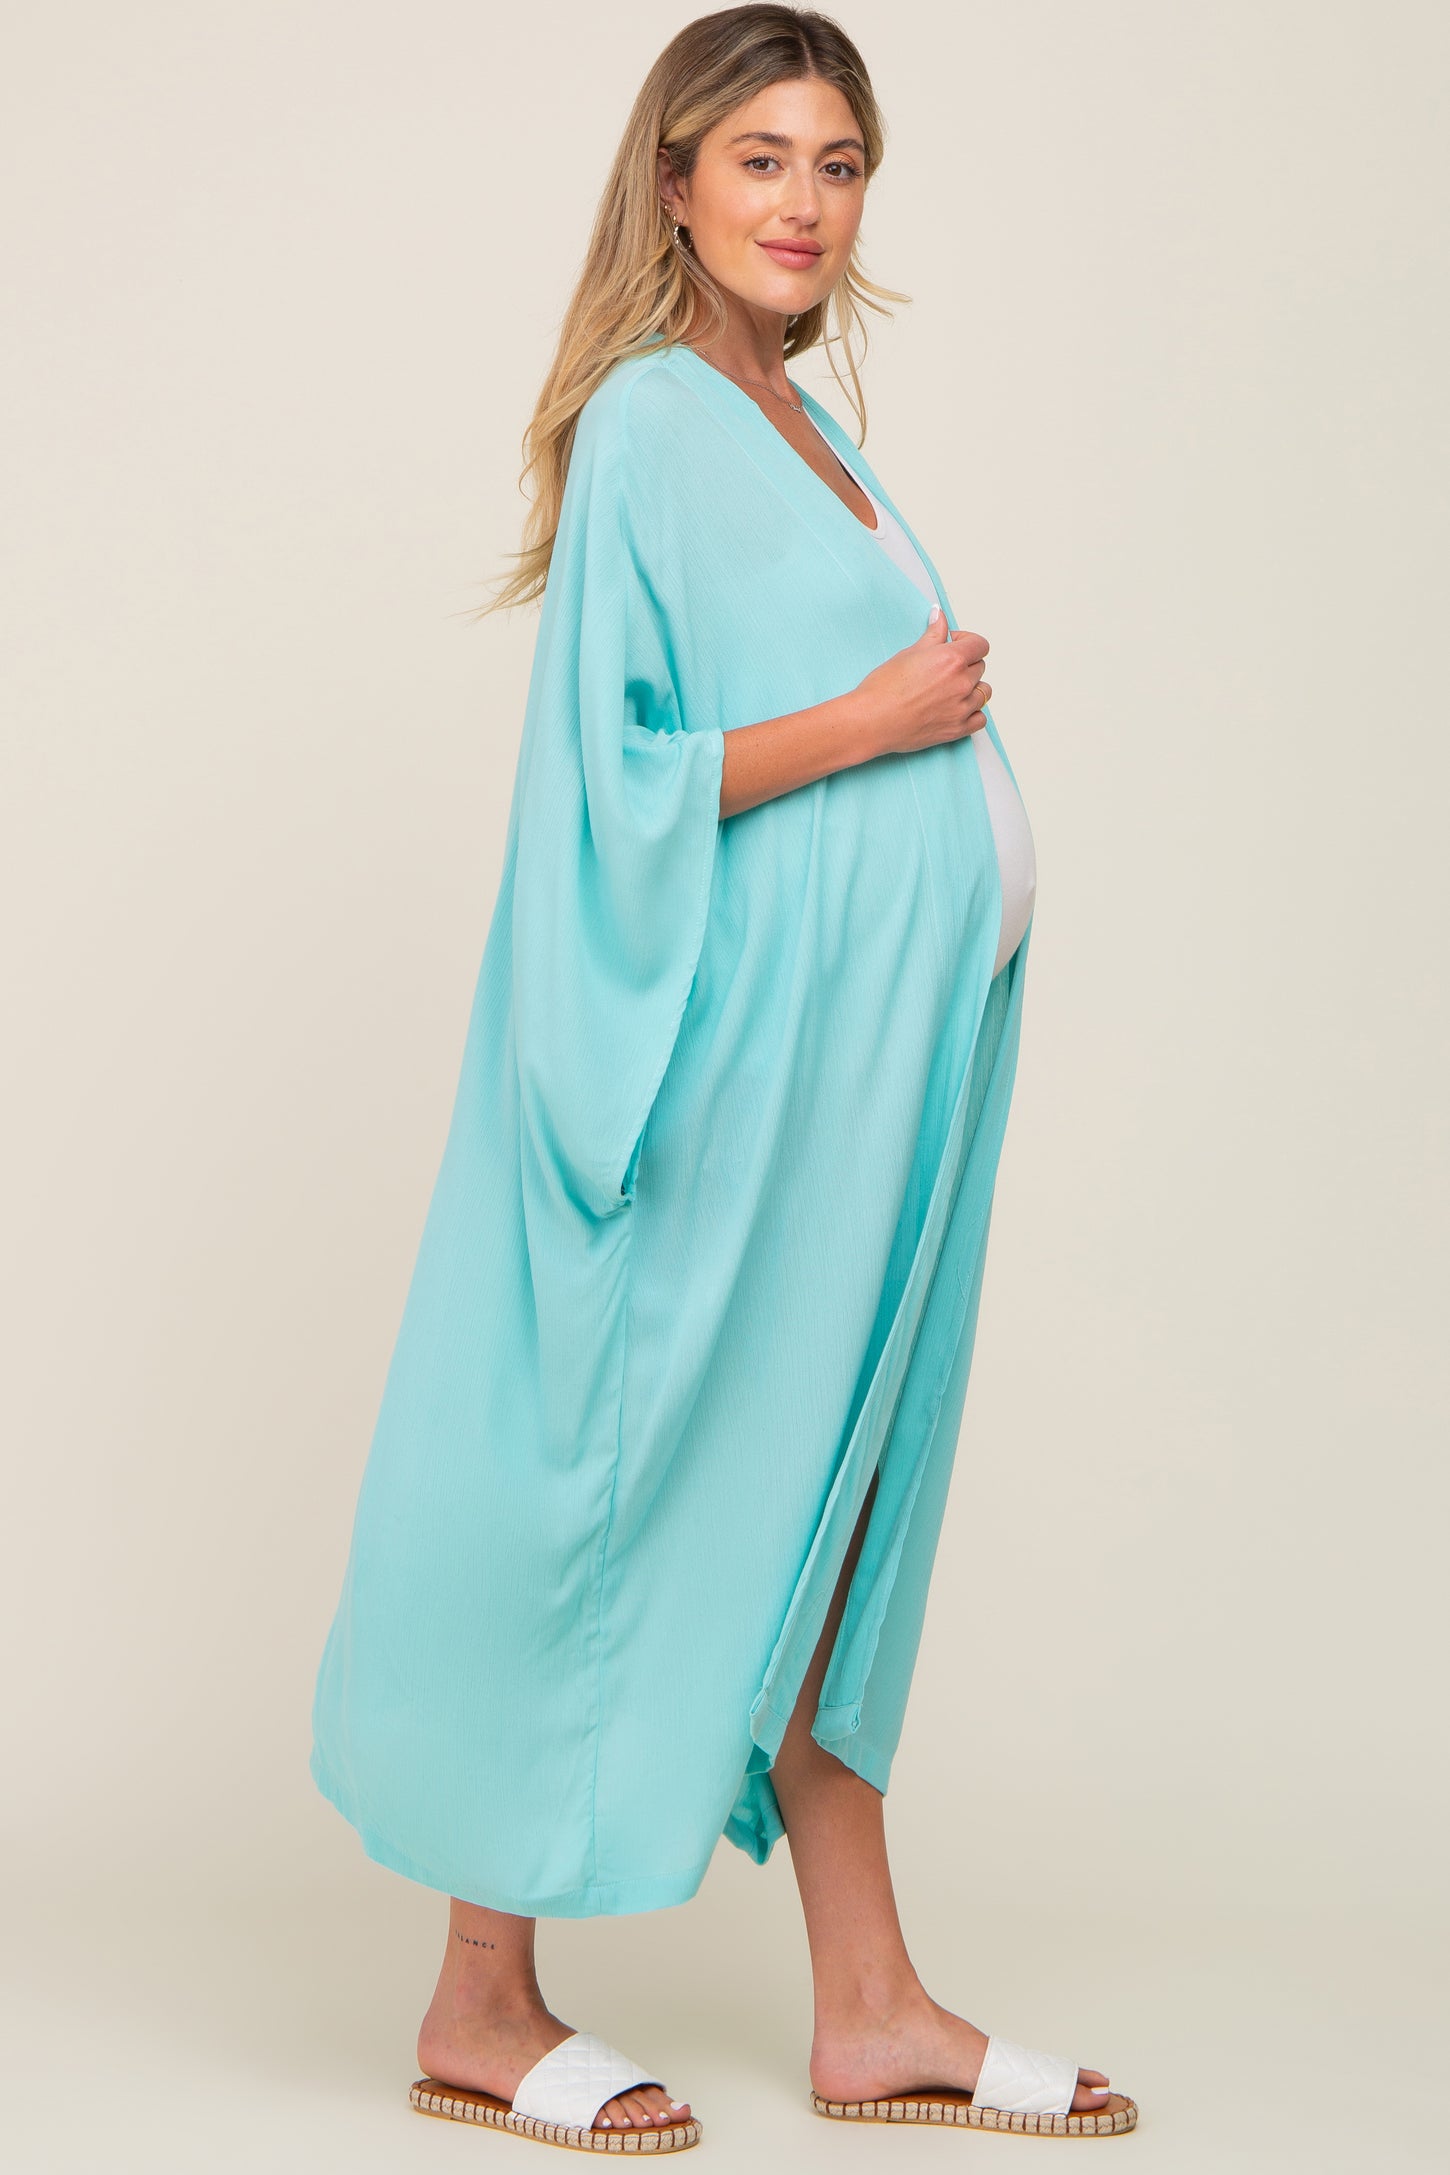 Mint Green Open Front Long Maternity Coverup